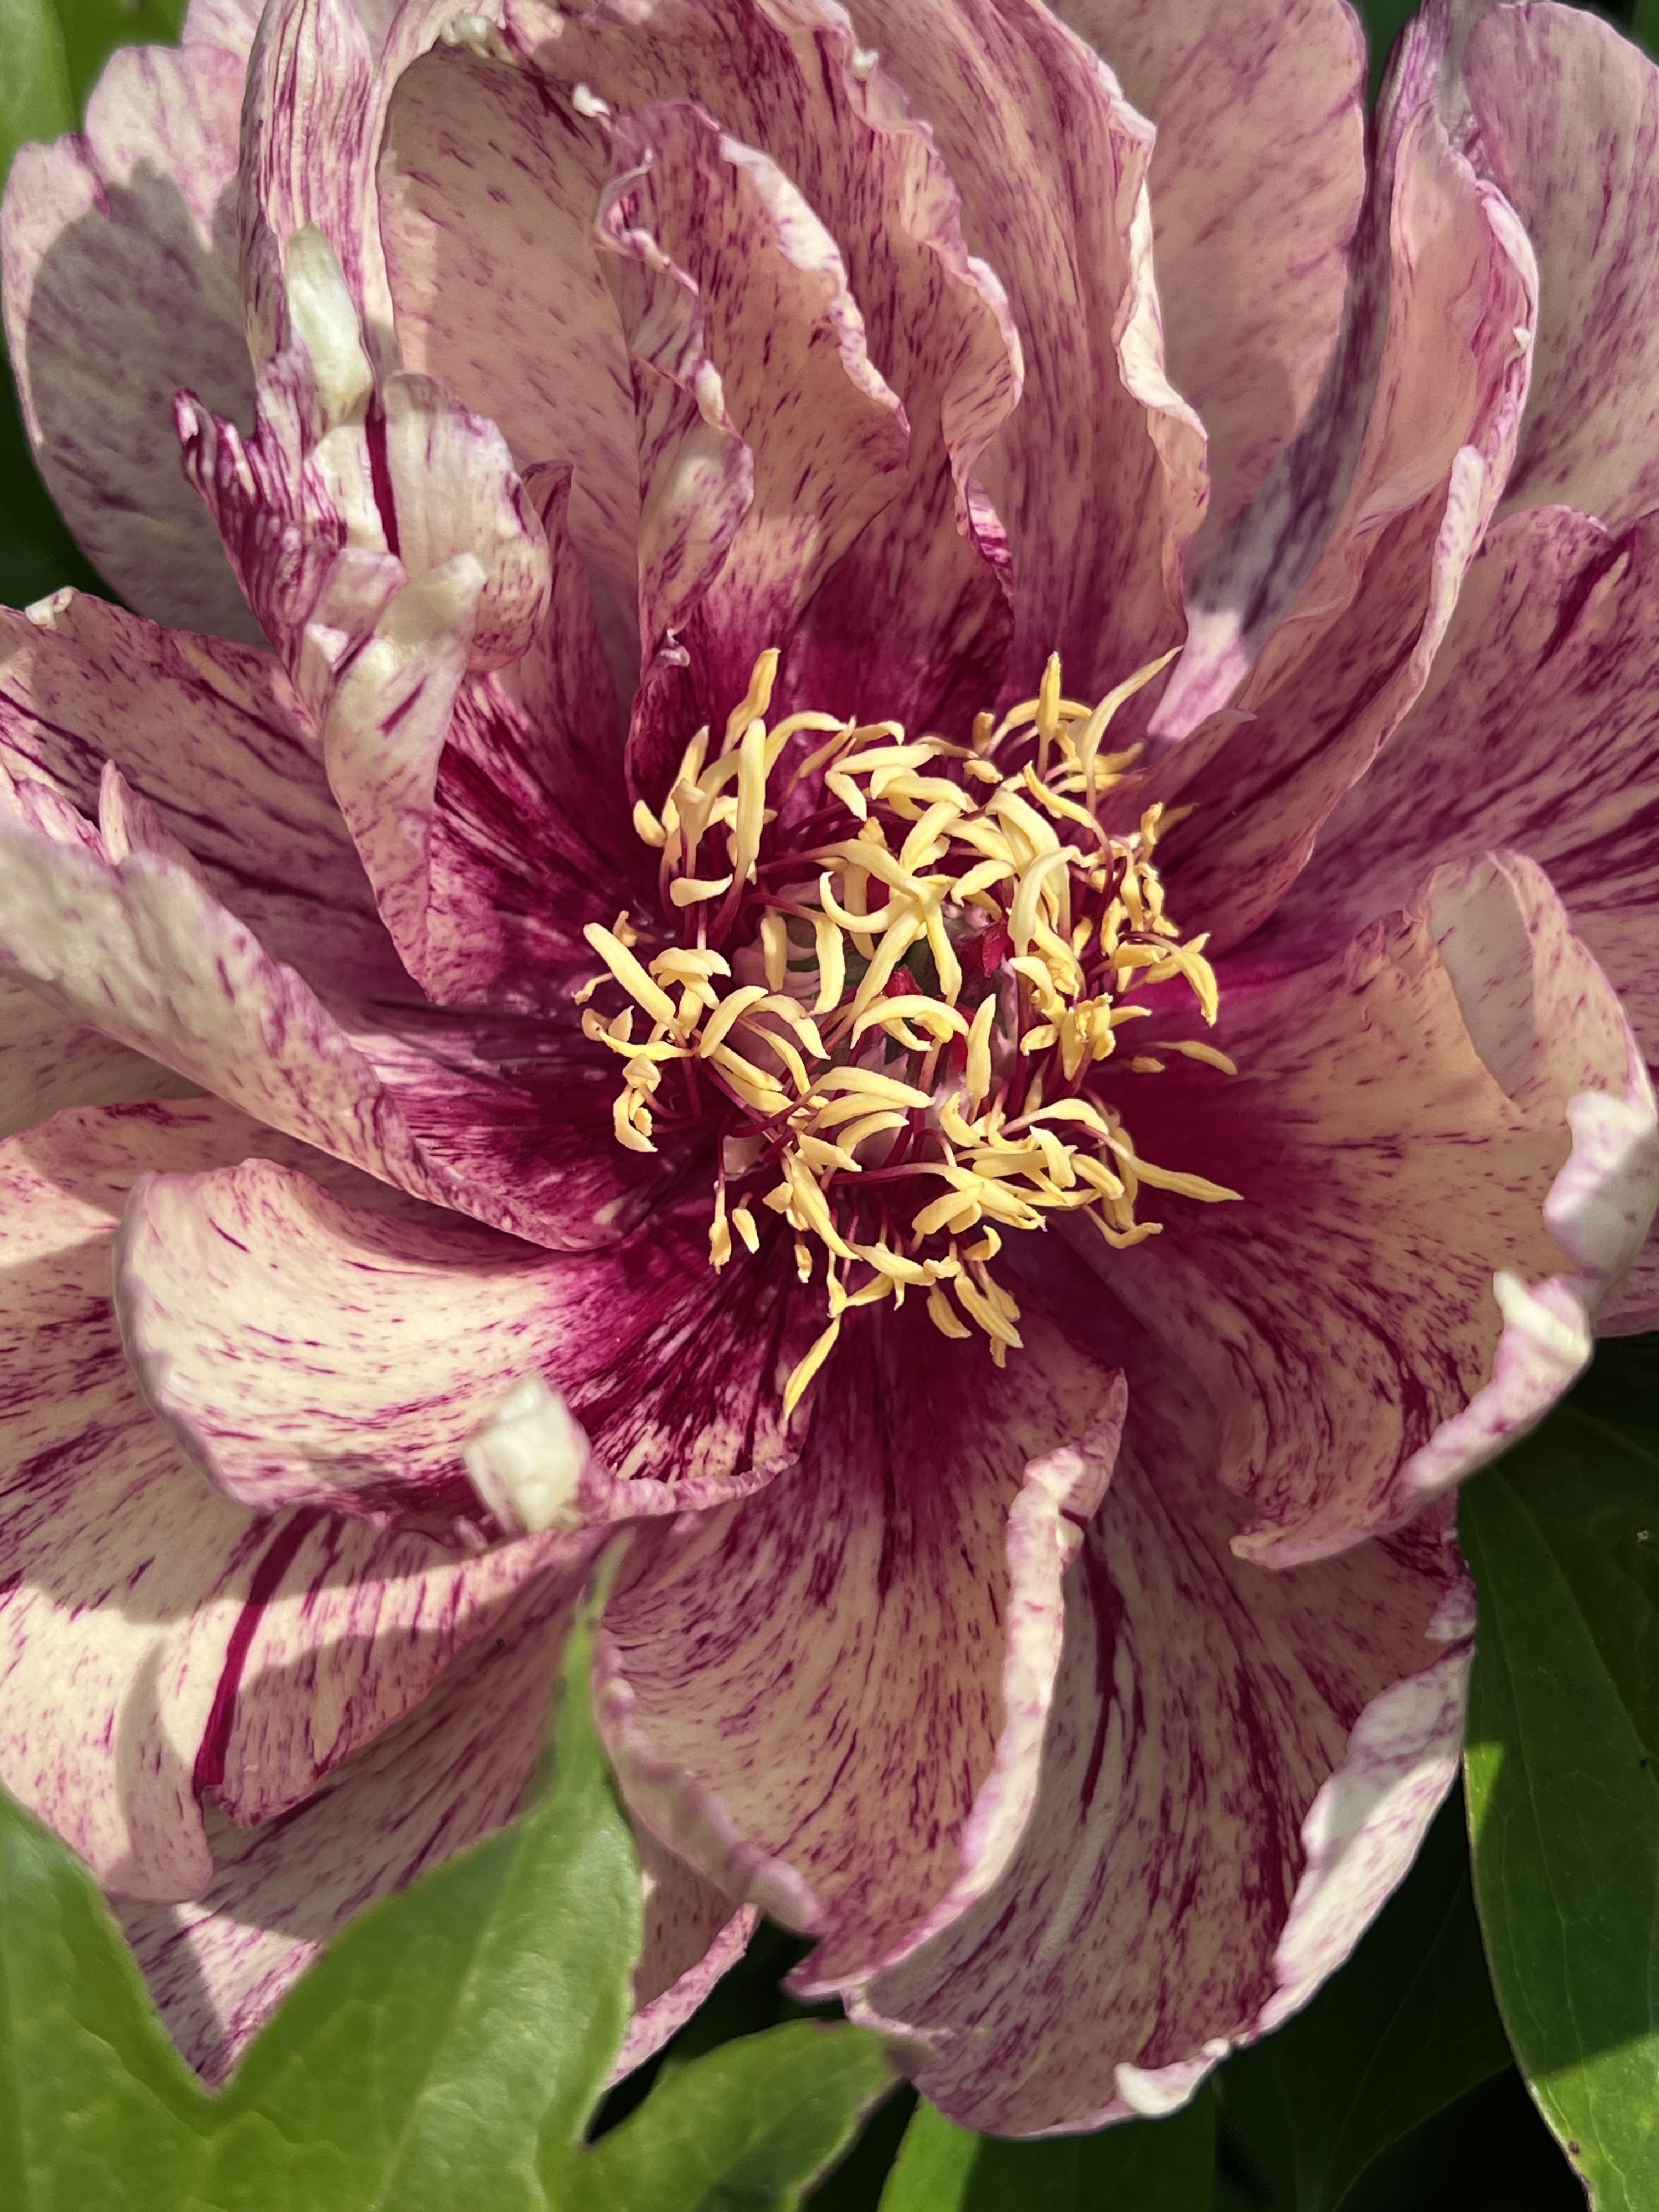 images/plants/paeonia/pae-all-that-jazz/pae-all-that-jazz-0003.JPG